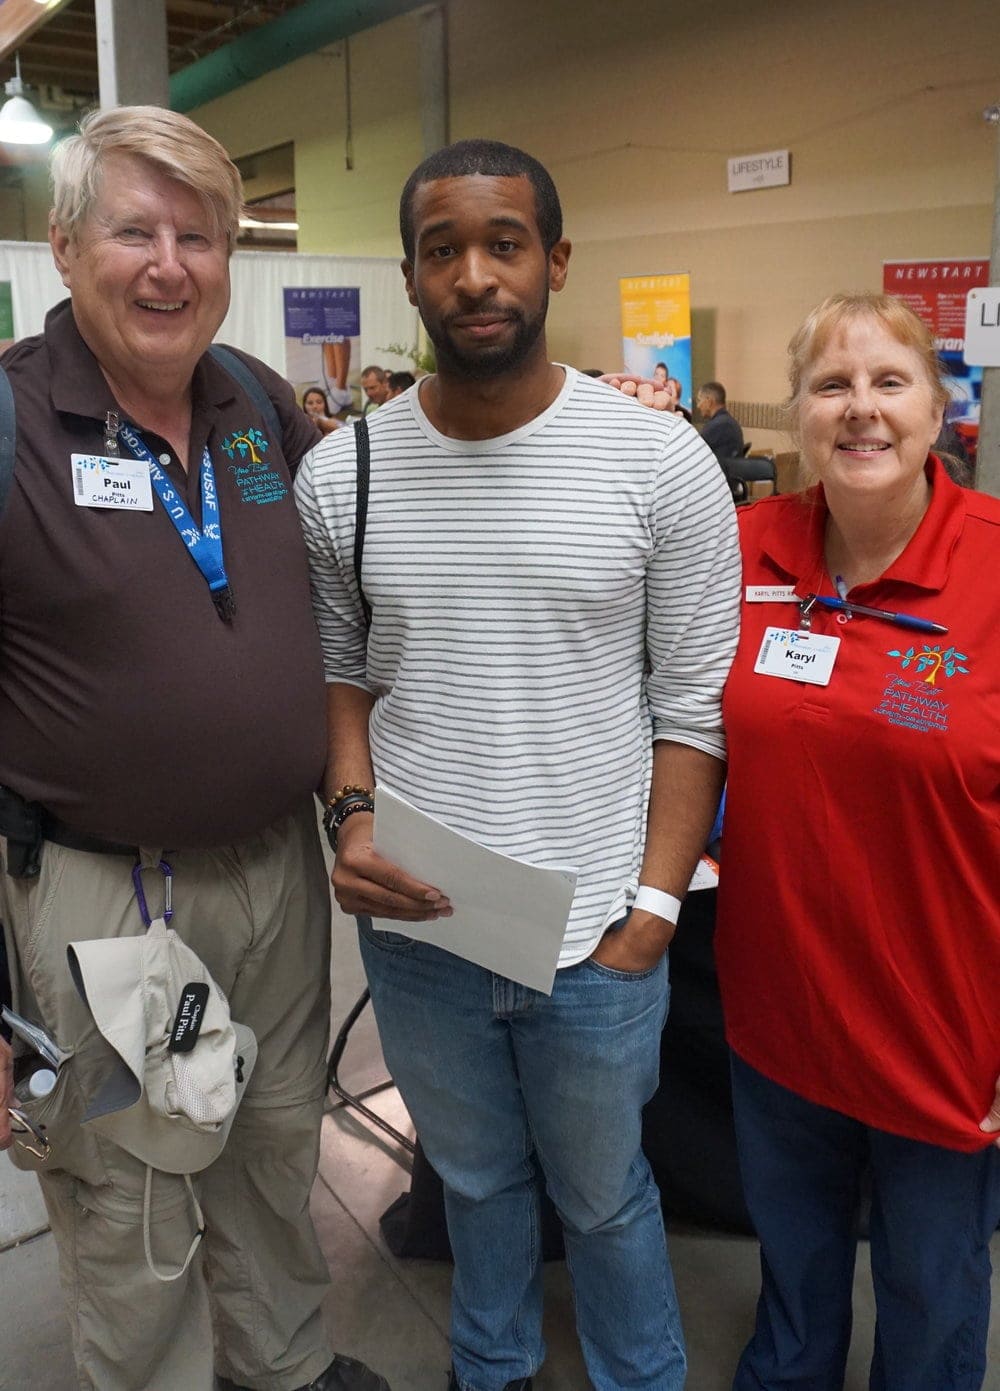 Kerwin Foster, center, attending the mega-clinic with his hosts, Paul and Karyl Pitts. (Melissa Ish)